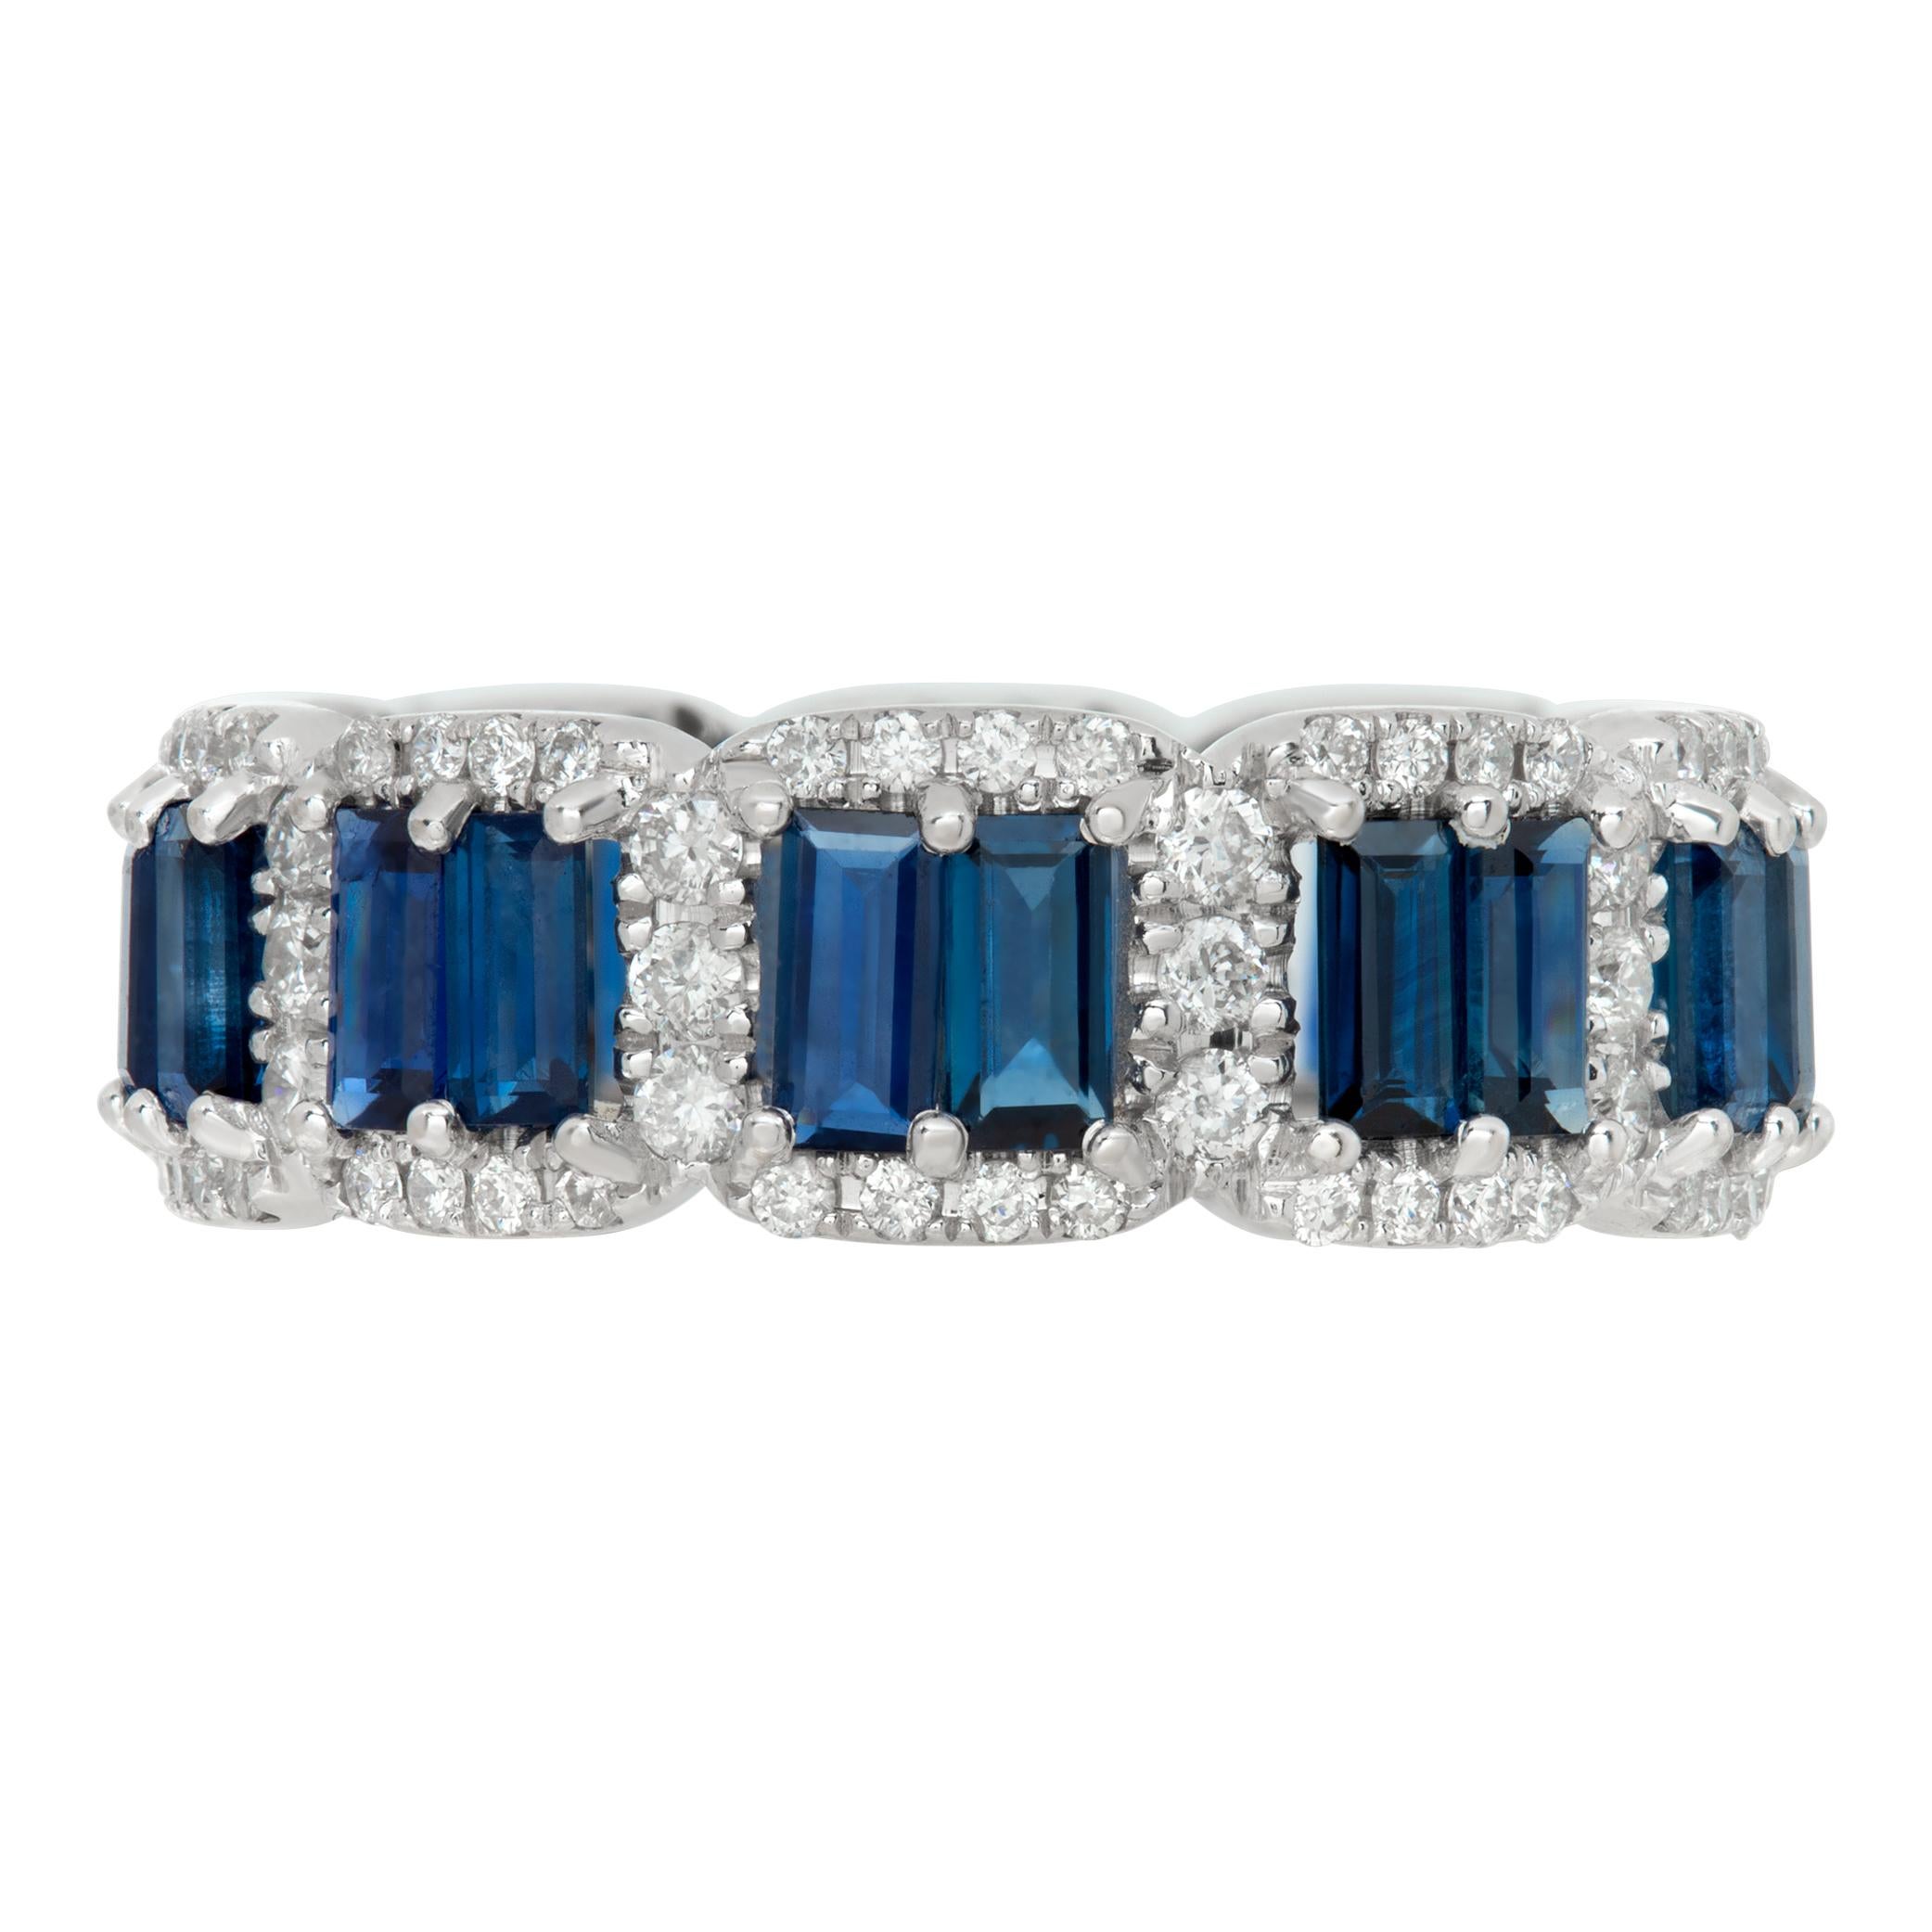 Blue sapphire and diamond eternity band in 18k white gold, with 0.79 carats in G-H color, VS-SI clarity diamonds and 2.89 carats in blues sapphires. 6.6 mm width. Size 6.75This Diamond/Sapphires ring is currently size 6.75 and some items can be